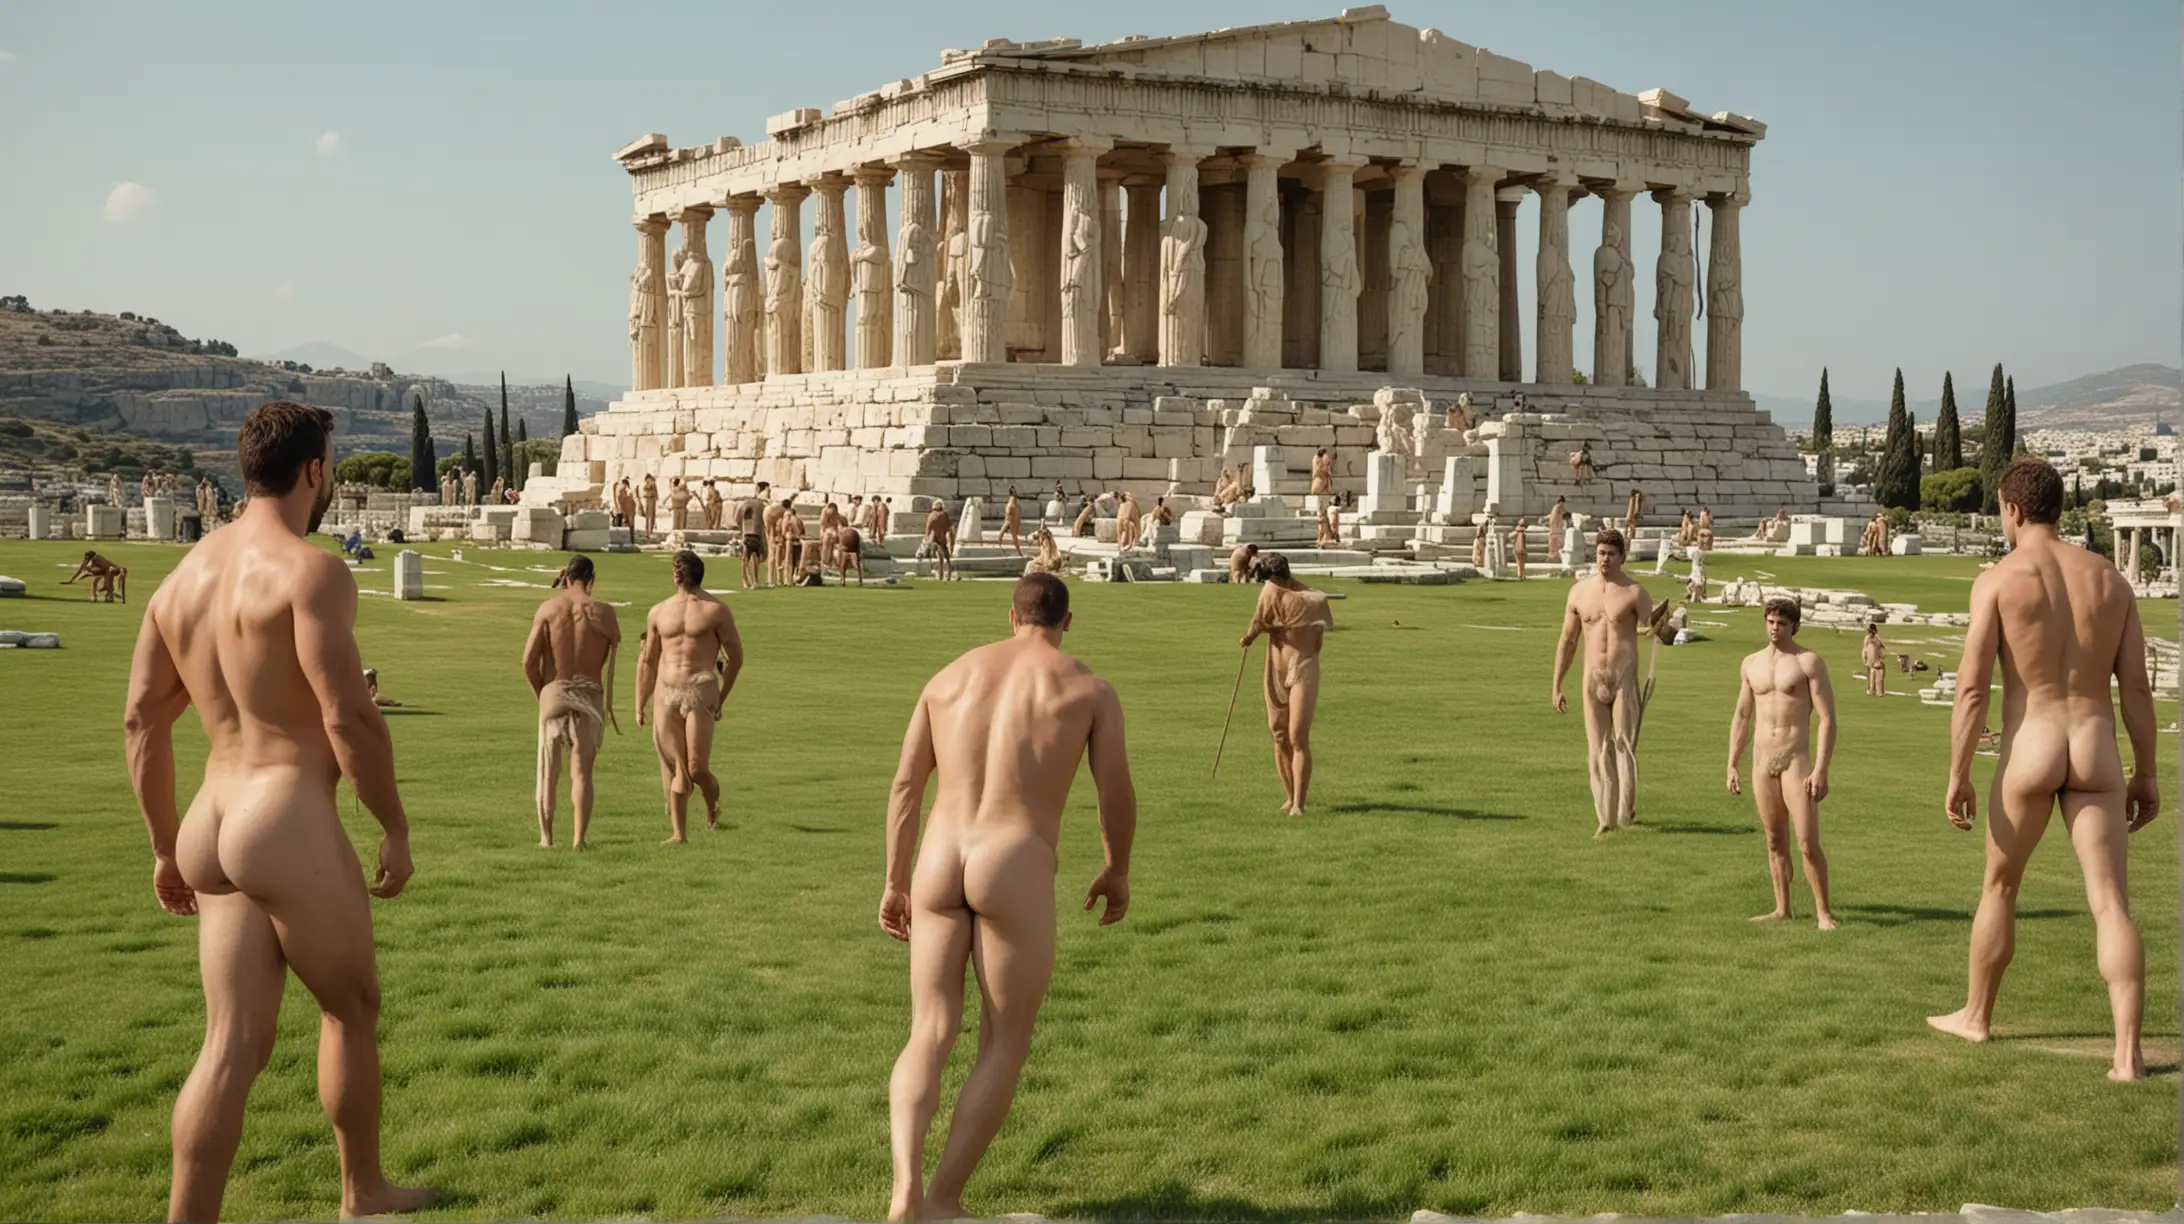 Ancient Greek Gathering on Grassy Fields with Homoerotic Statues